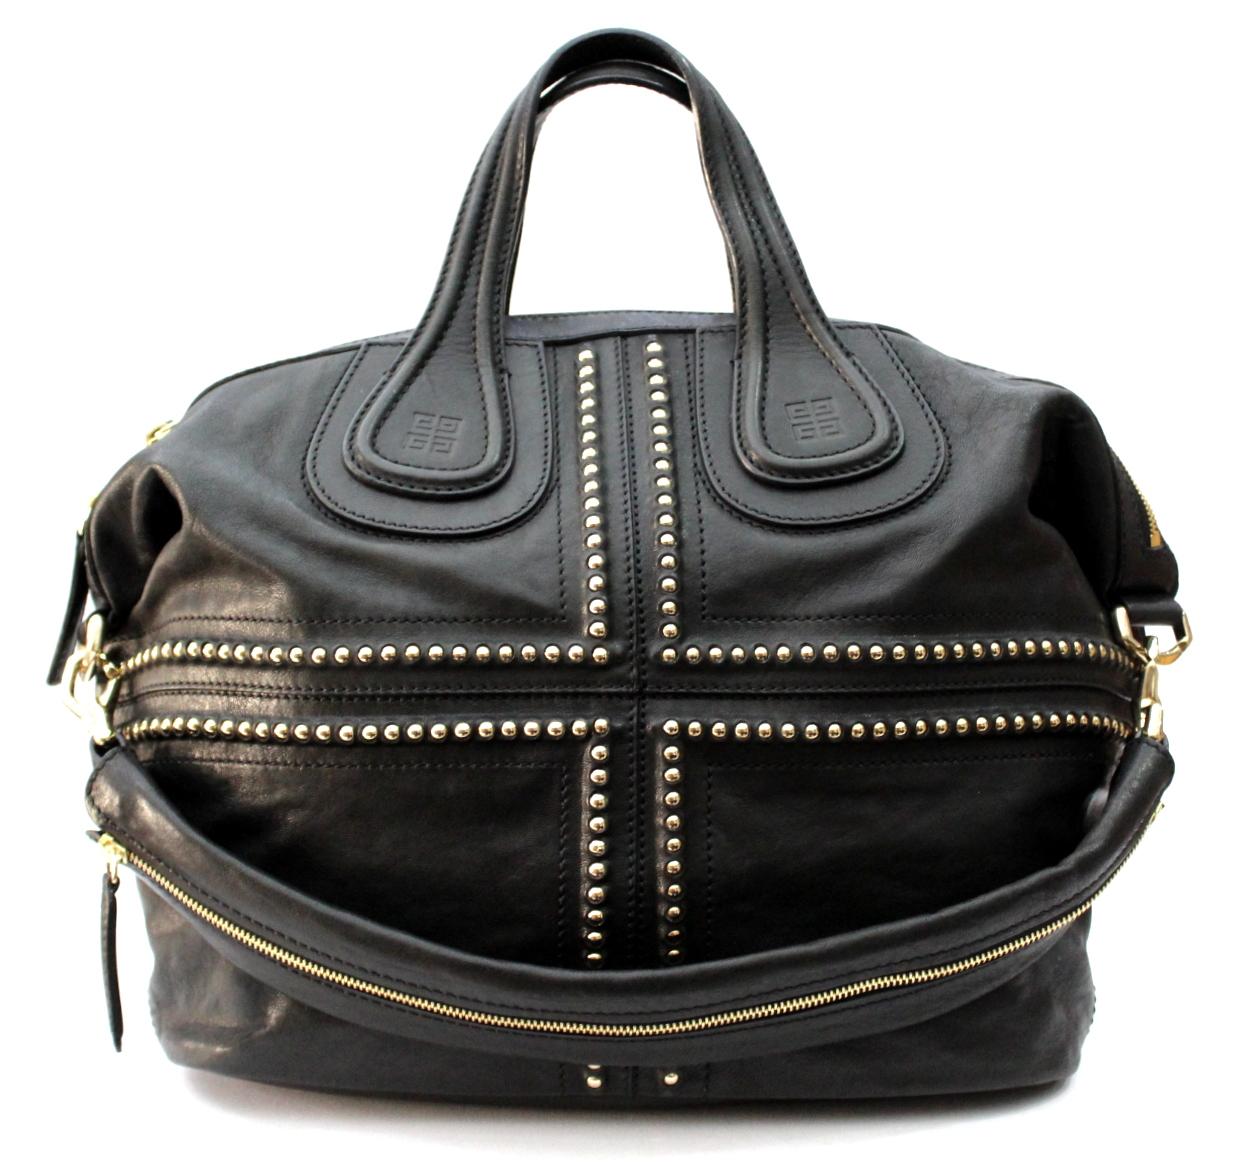 Beautiful bag Givenchy model Nightingale. It is made in black leather and embellished with studs. The Nightingale bag features two soft leather top handles, comes with the Givenchy signature emblem logo stamped at the base of each handle and the